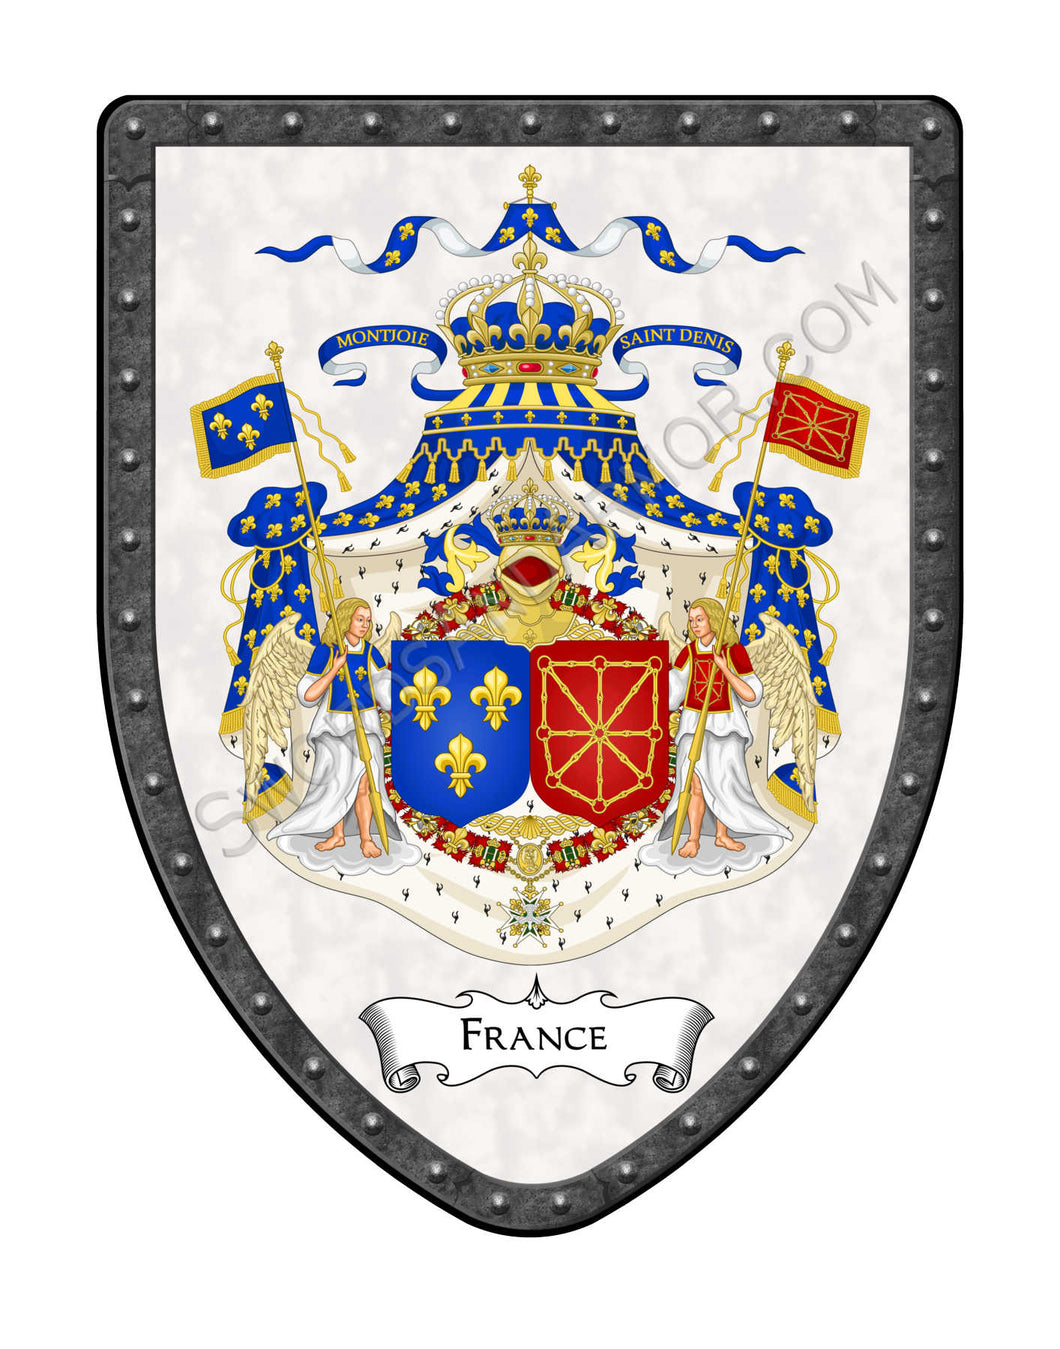 France Coat of Arms Shield - White